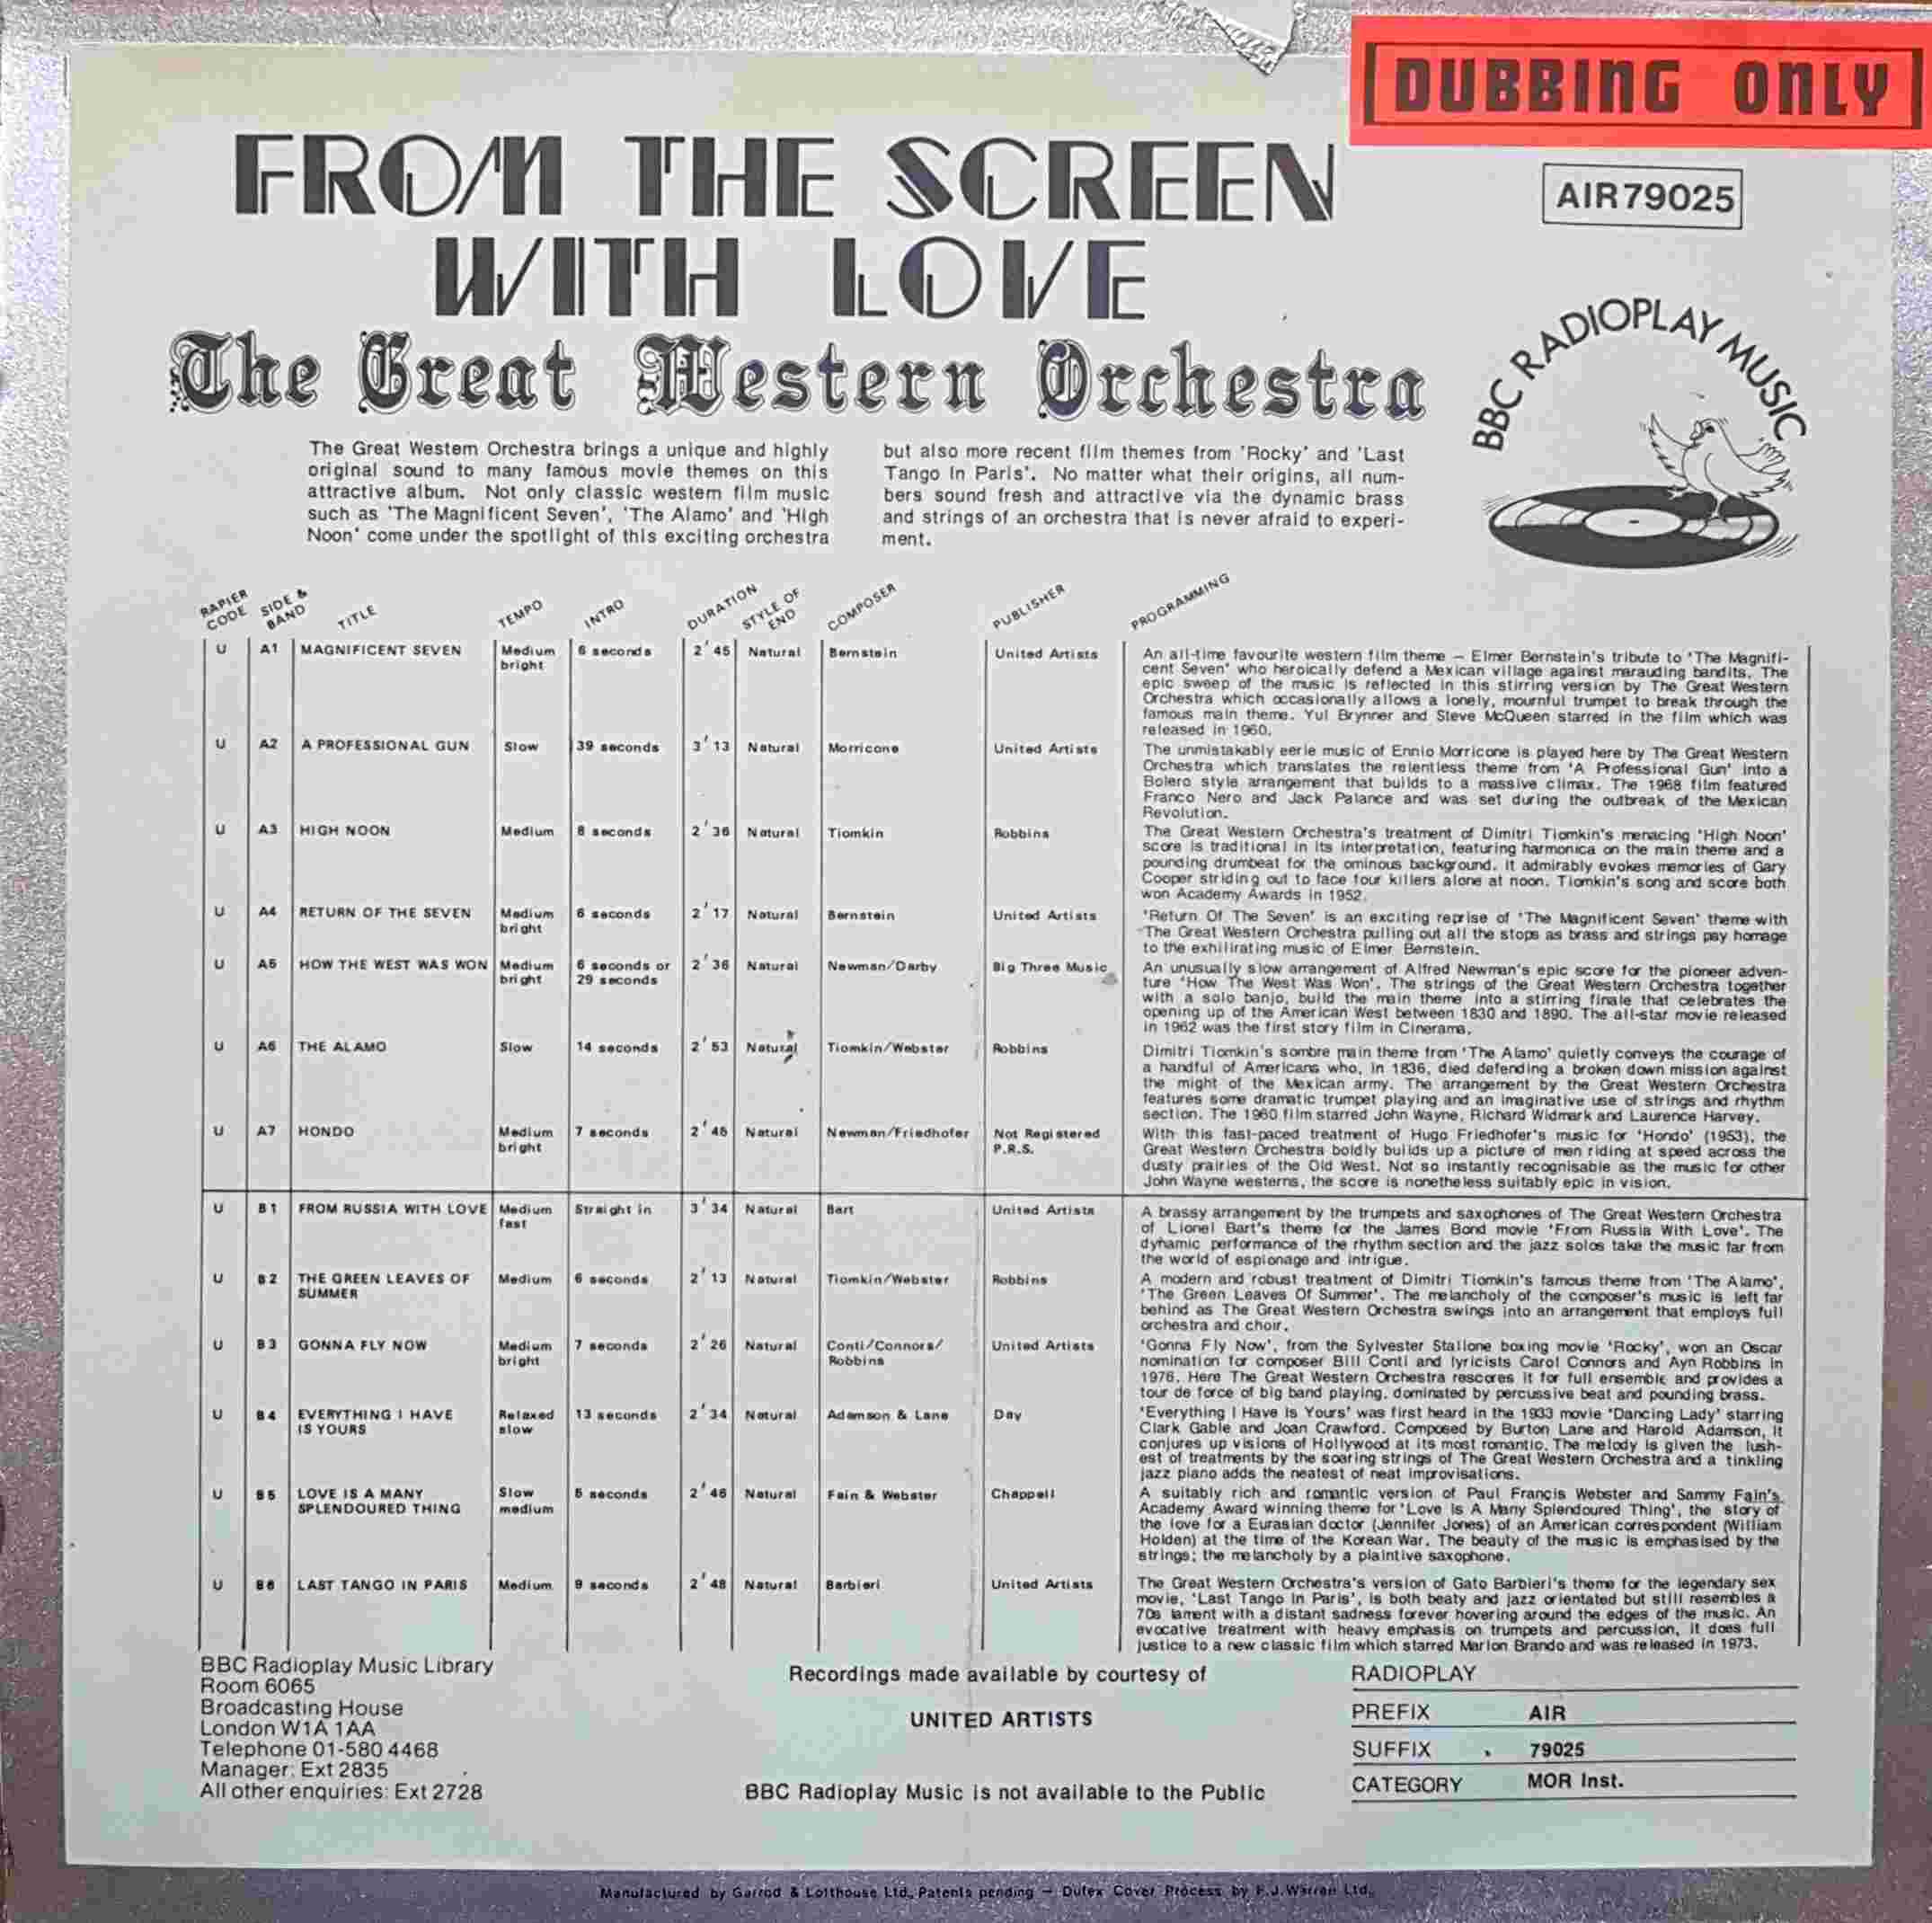 Picture of AIR 79025 From the screen with love by artist The Great Western Orchestra from the BBC records and Tapes library